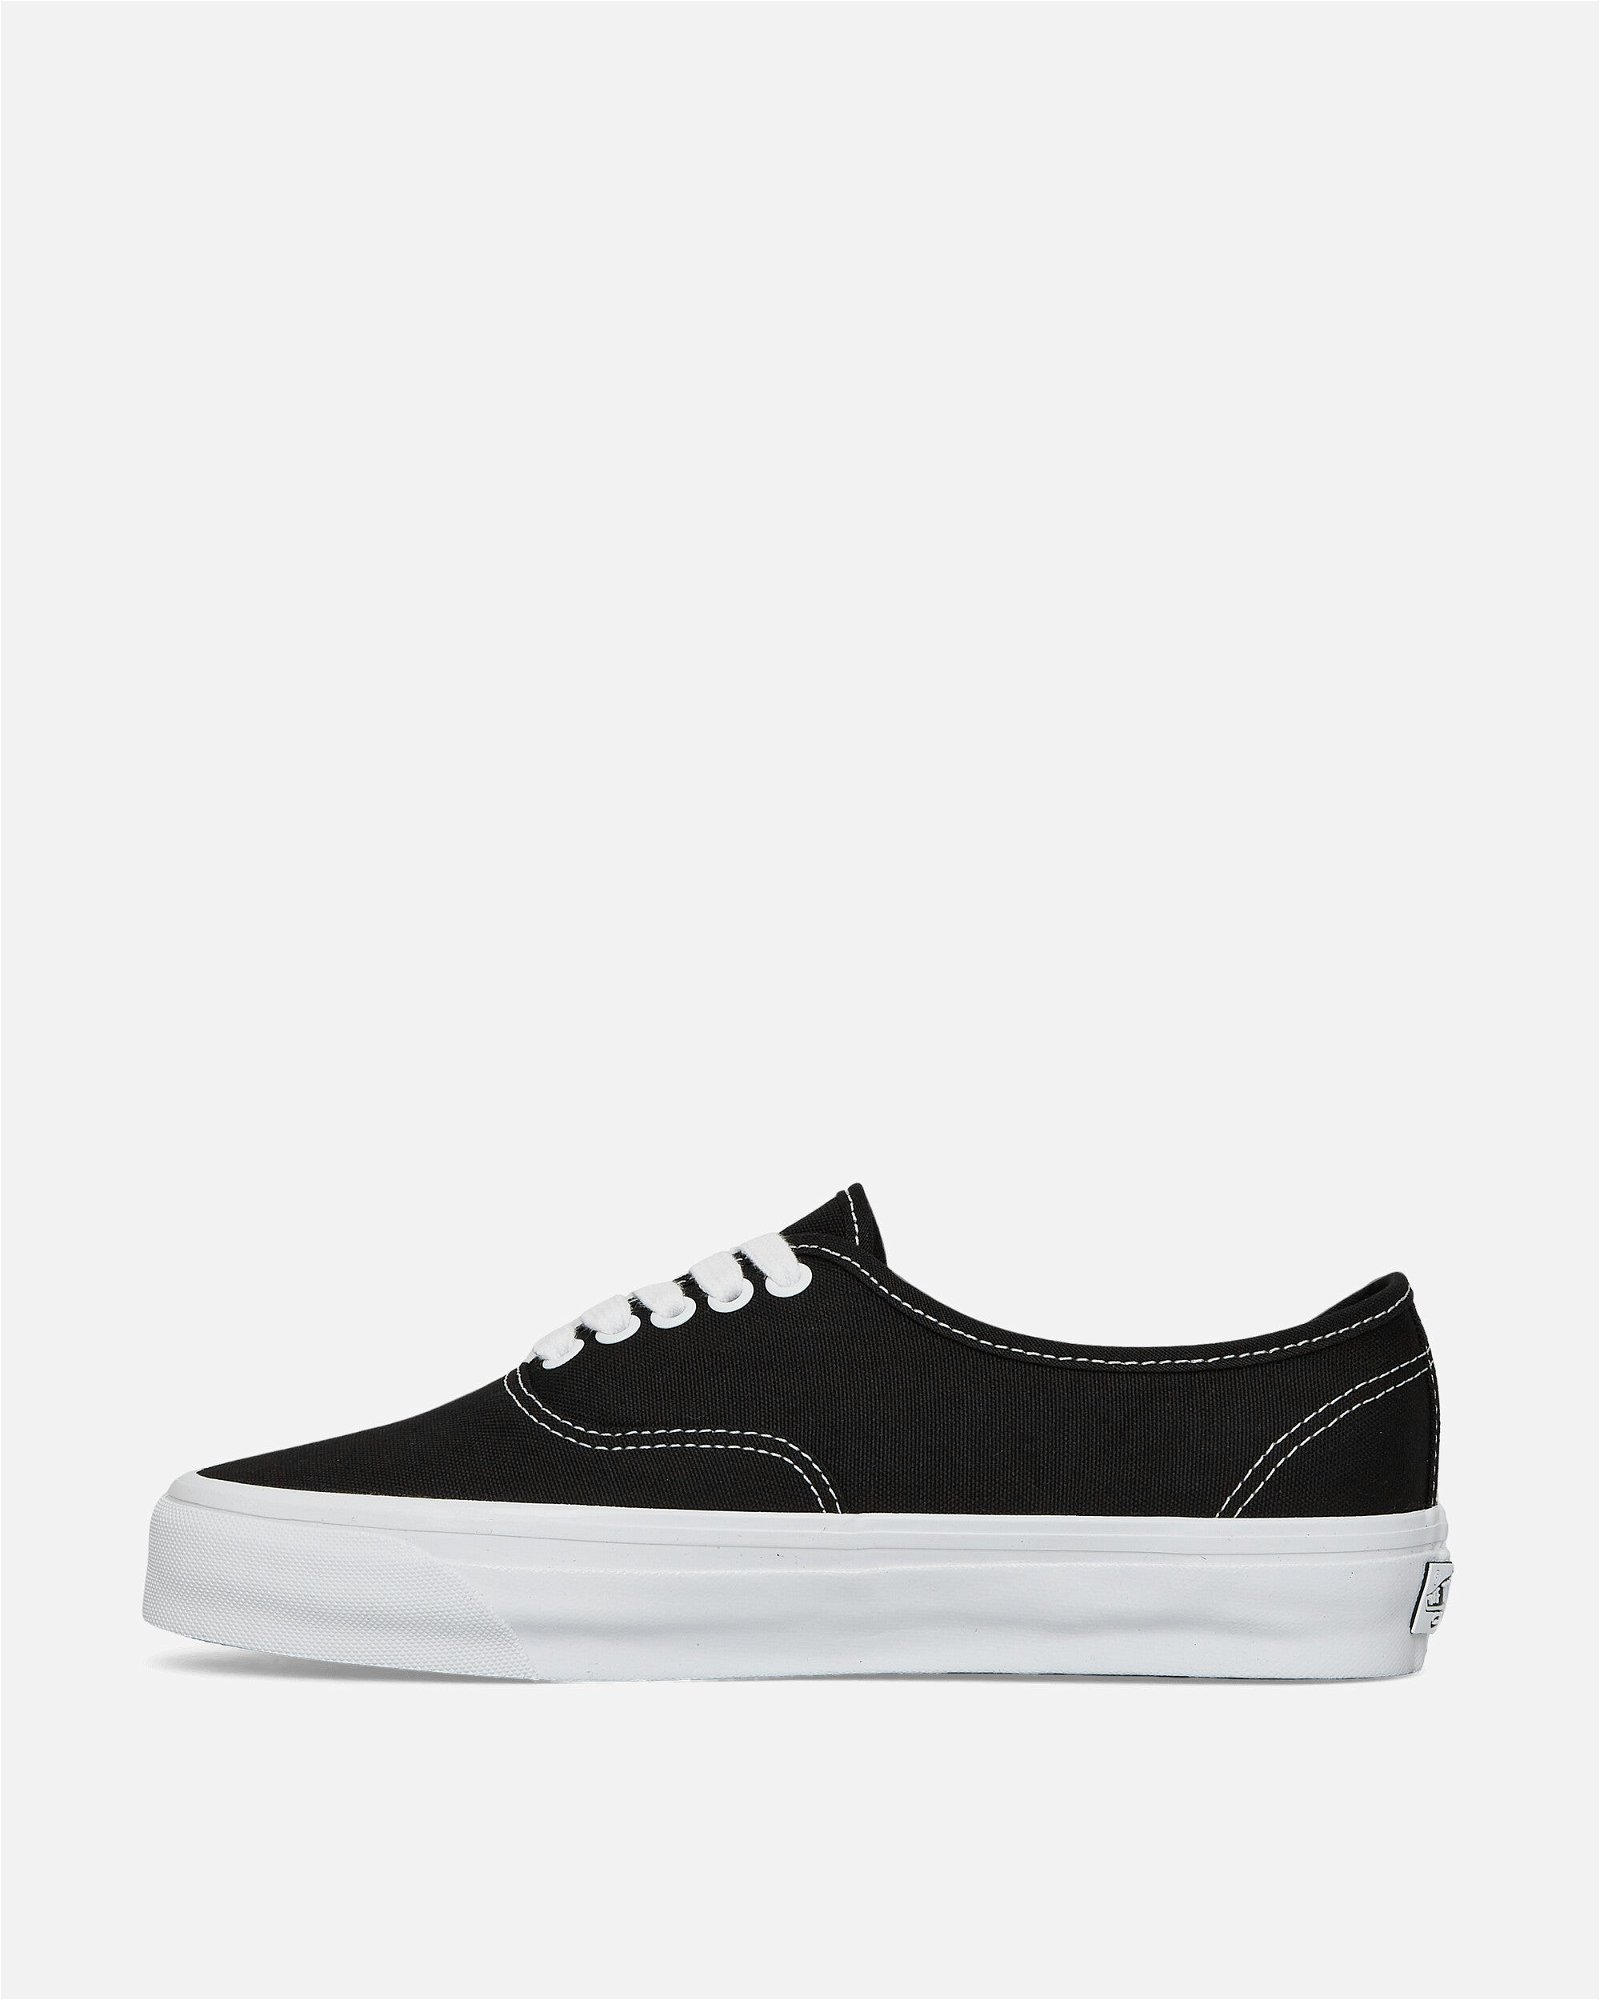 OG Authentic LX Sneakers Black